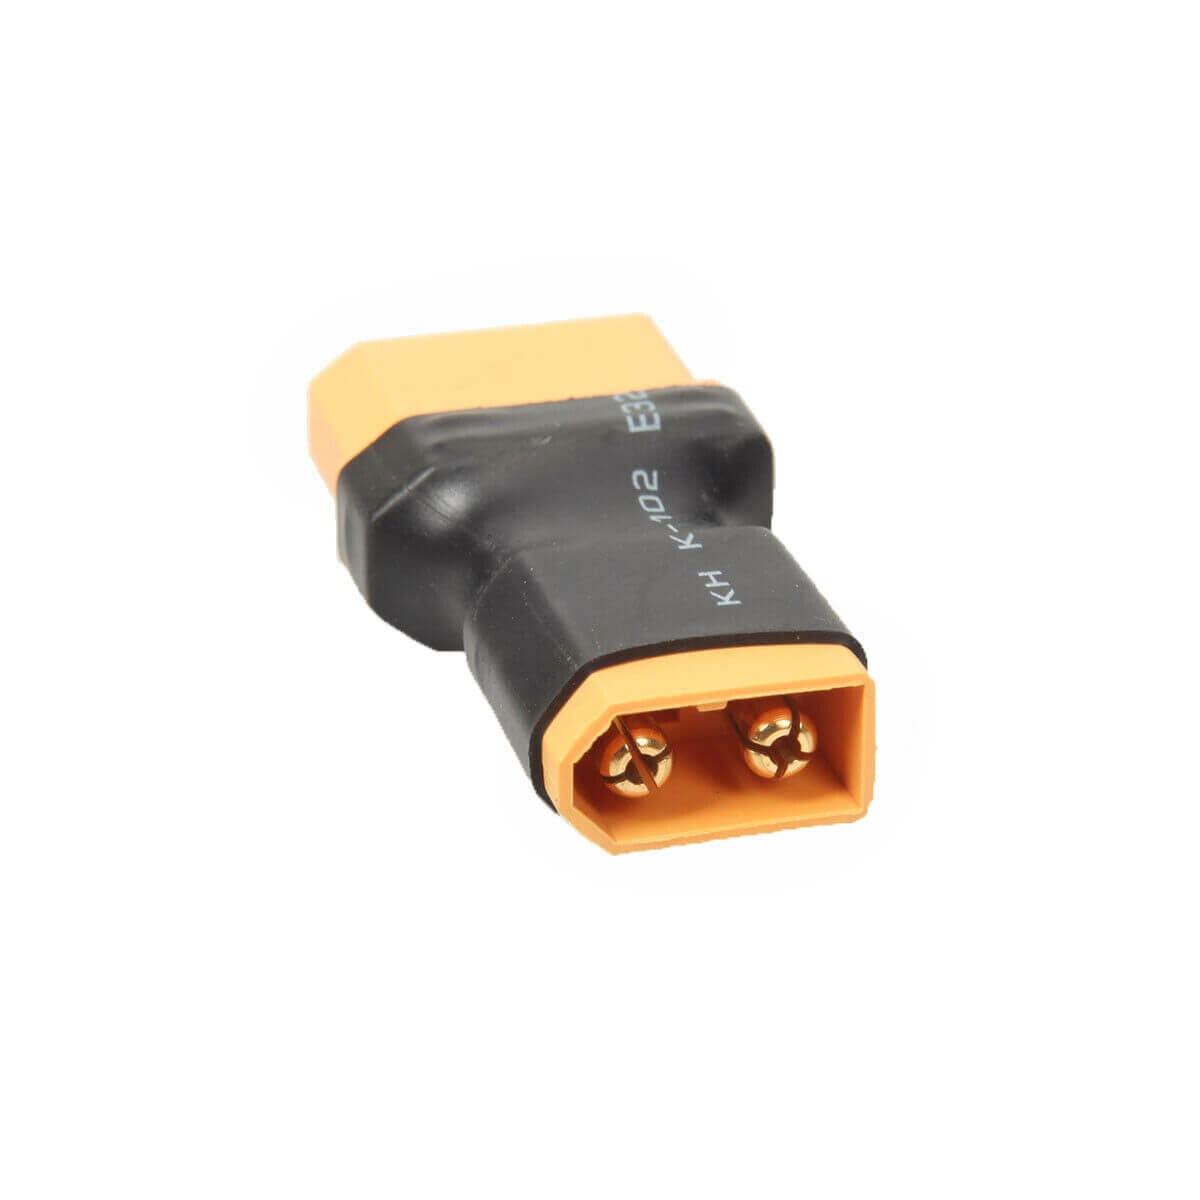 XT60 Female Connector to XT30 Male Plug Adapter